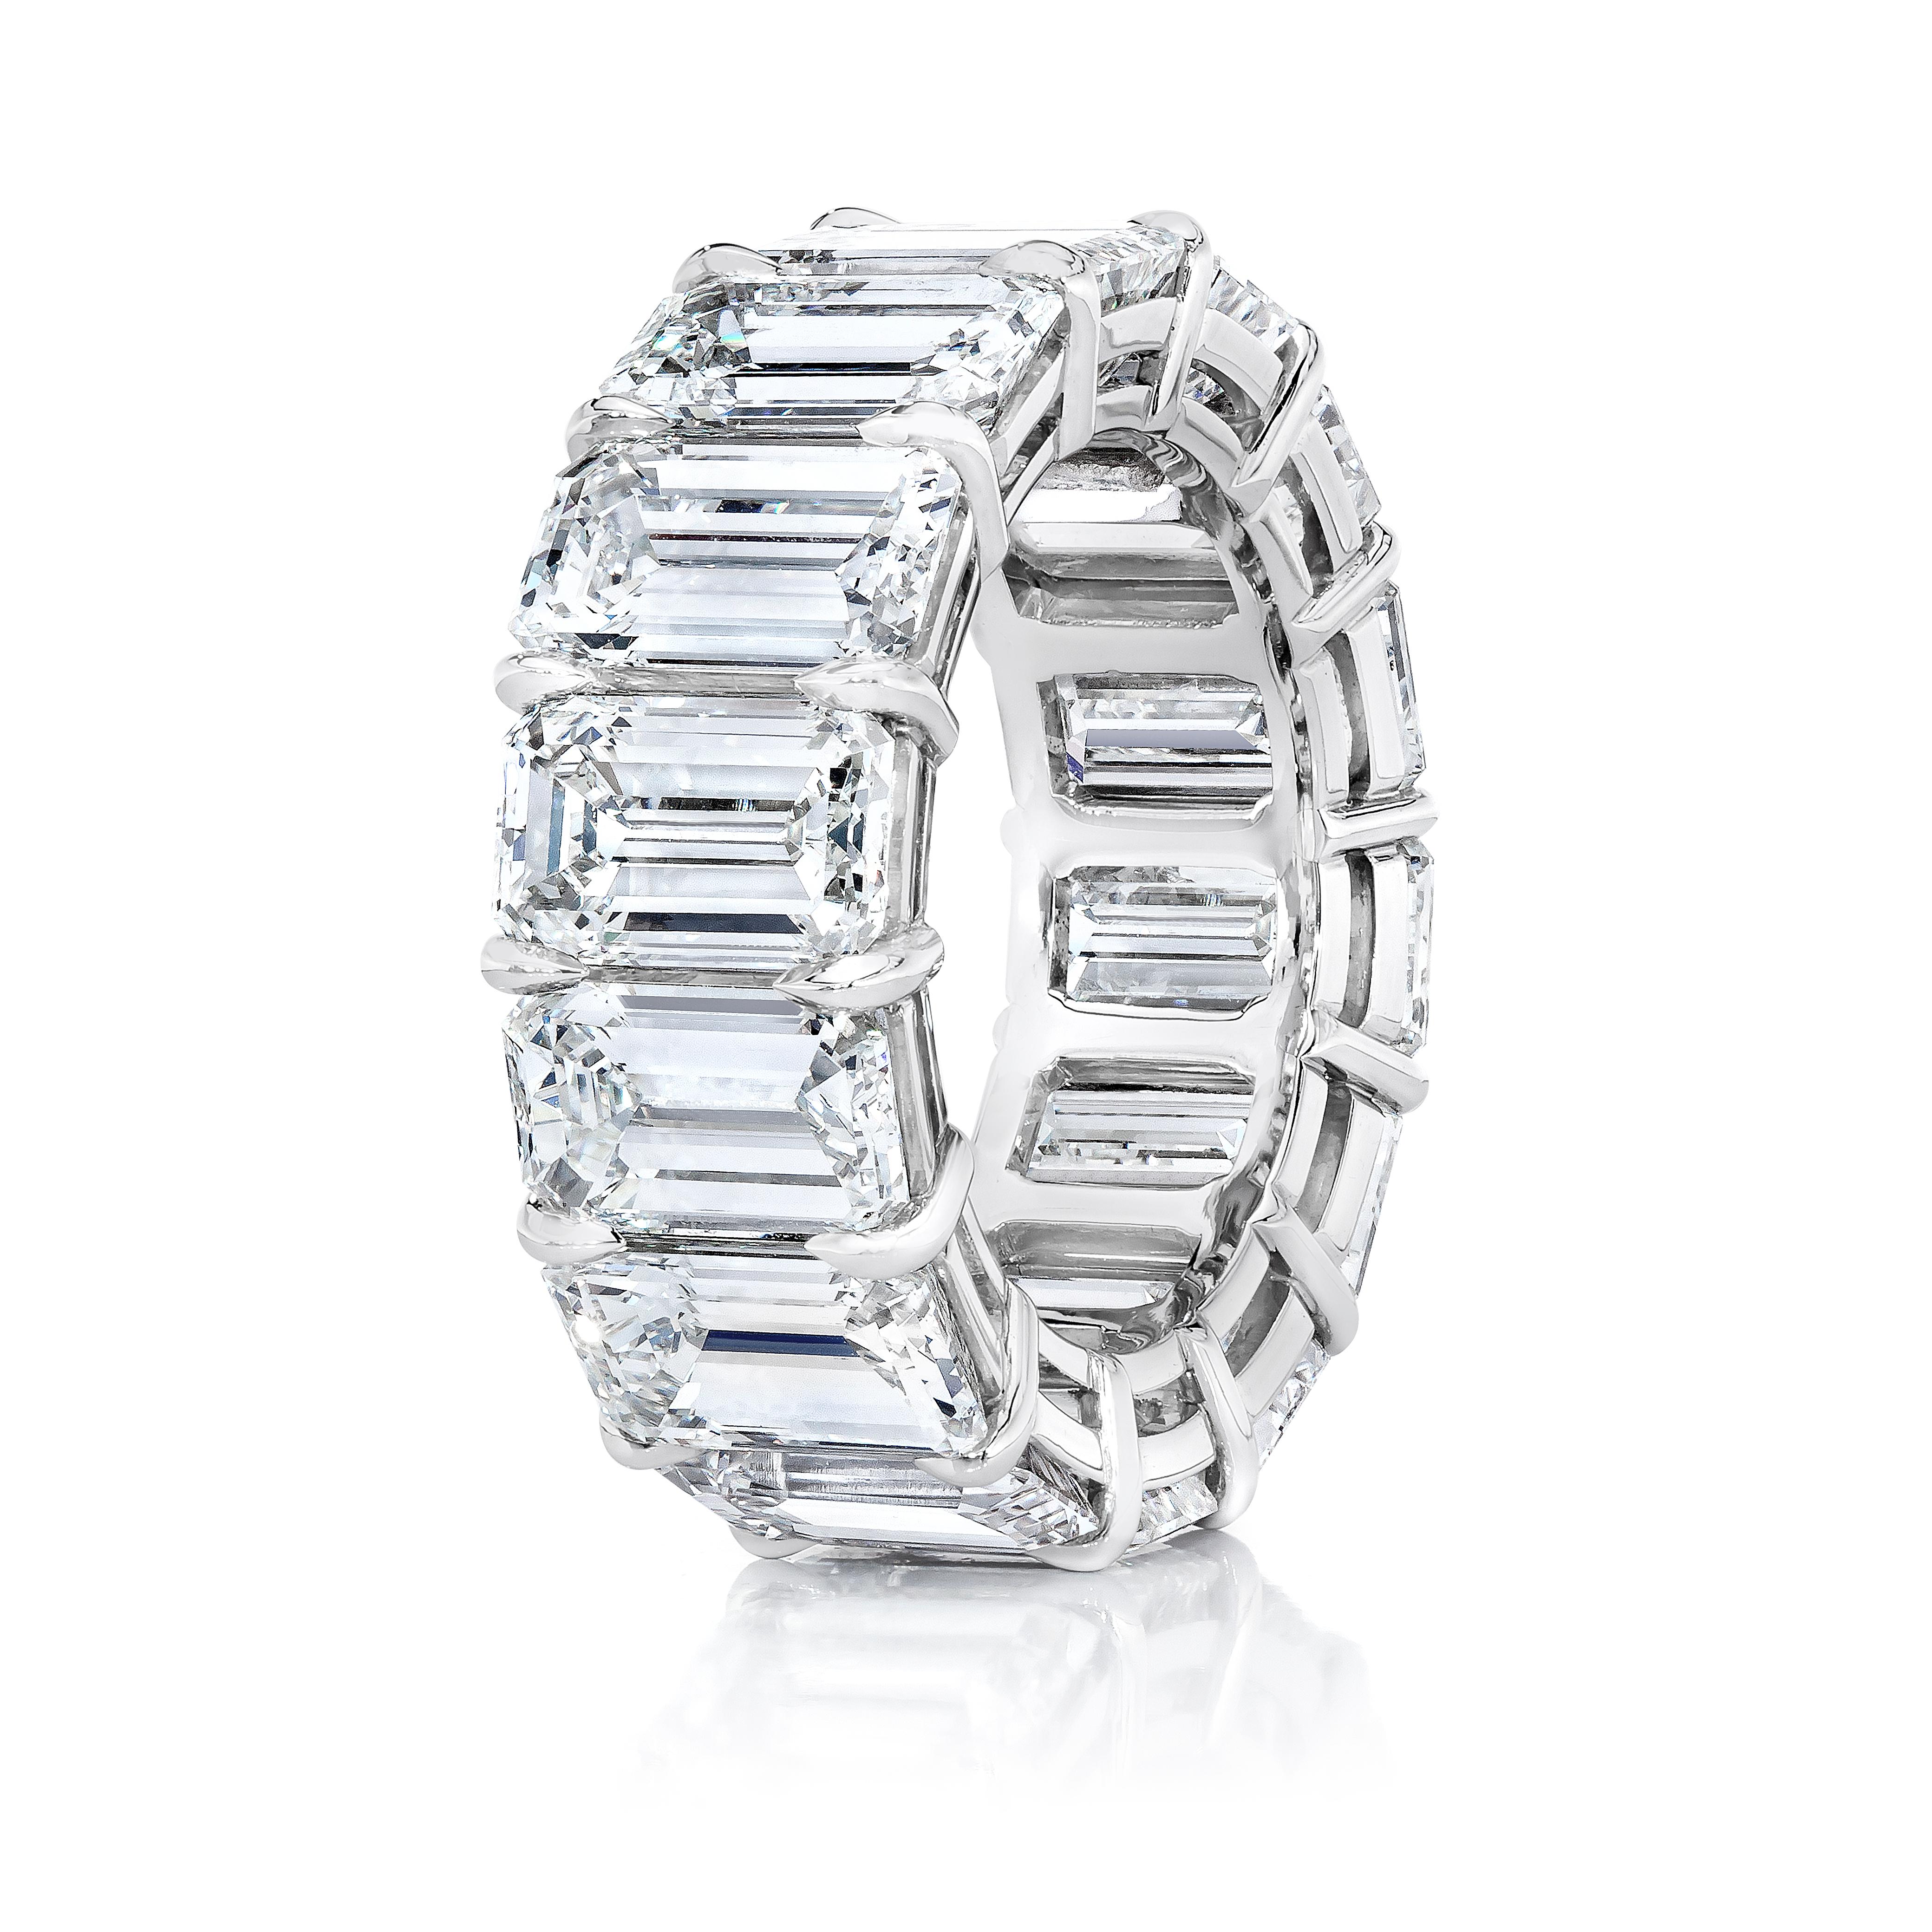 The Ultimate Emerald Cut Eternity Band.
14 Perfectly Matched Emerald Cuts each weighing over 1.20 Carat for 16.80 Carats in Total.
E-G Color and VS-VVS Clarity.
Set in a Platinum Handmade Classic Setting